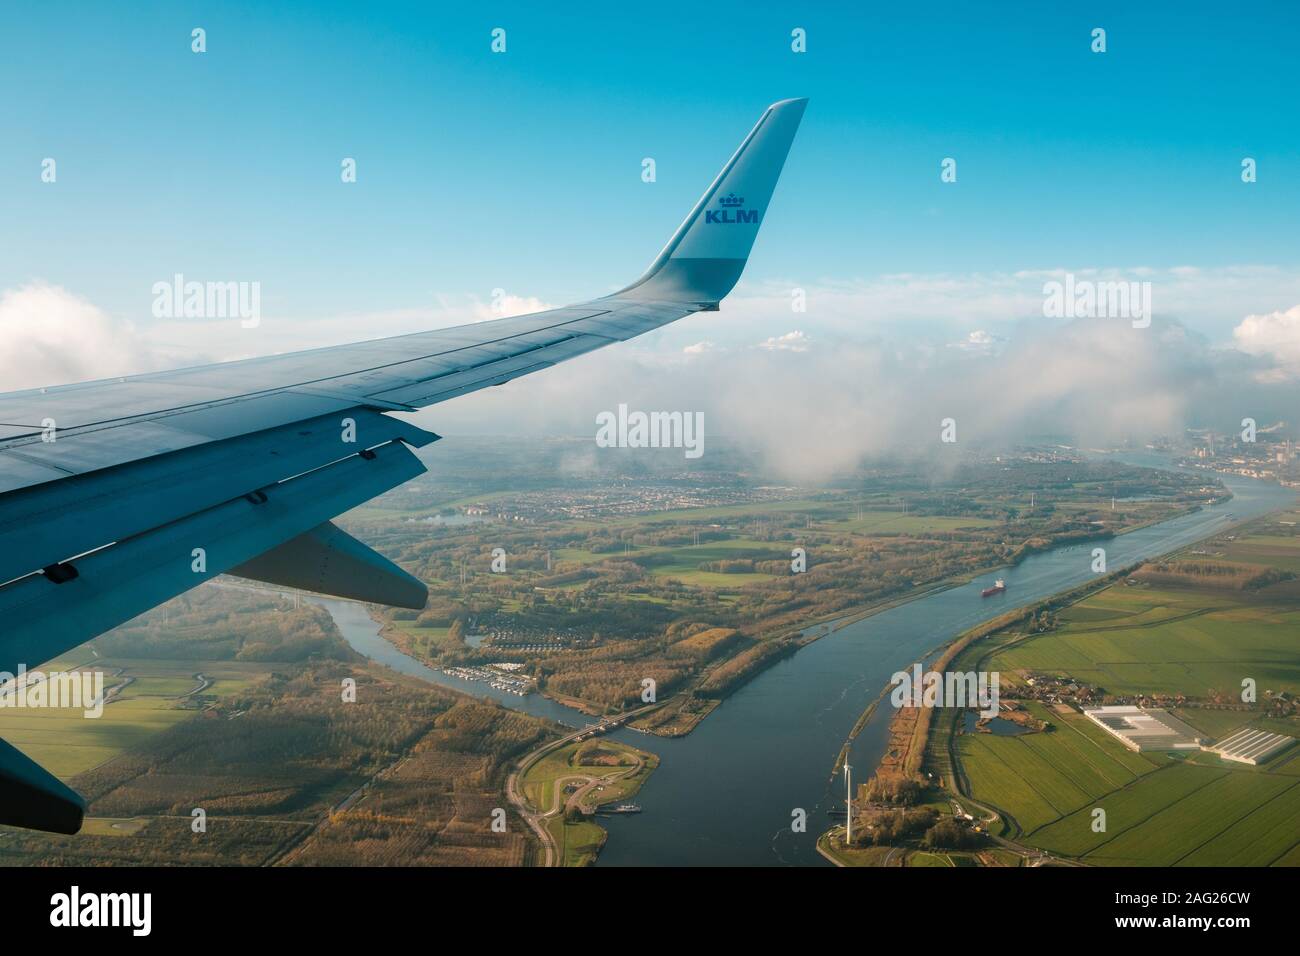 Amsterdam, Netherlands - November, 2019: Airplane wing and company brand logo of KLM Airlines and aerial landscape view from airplane Stock Photo